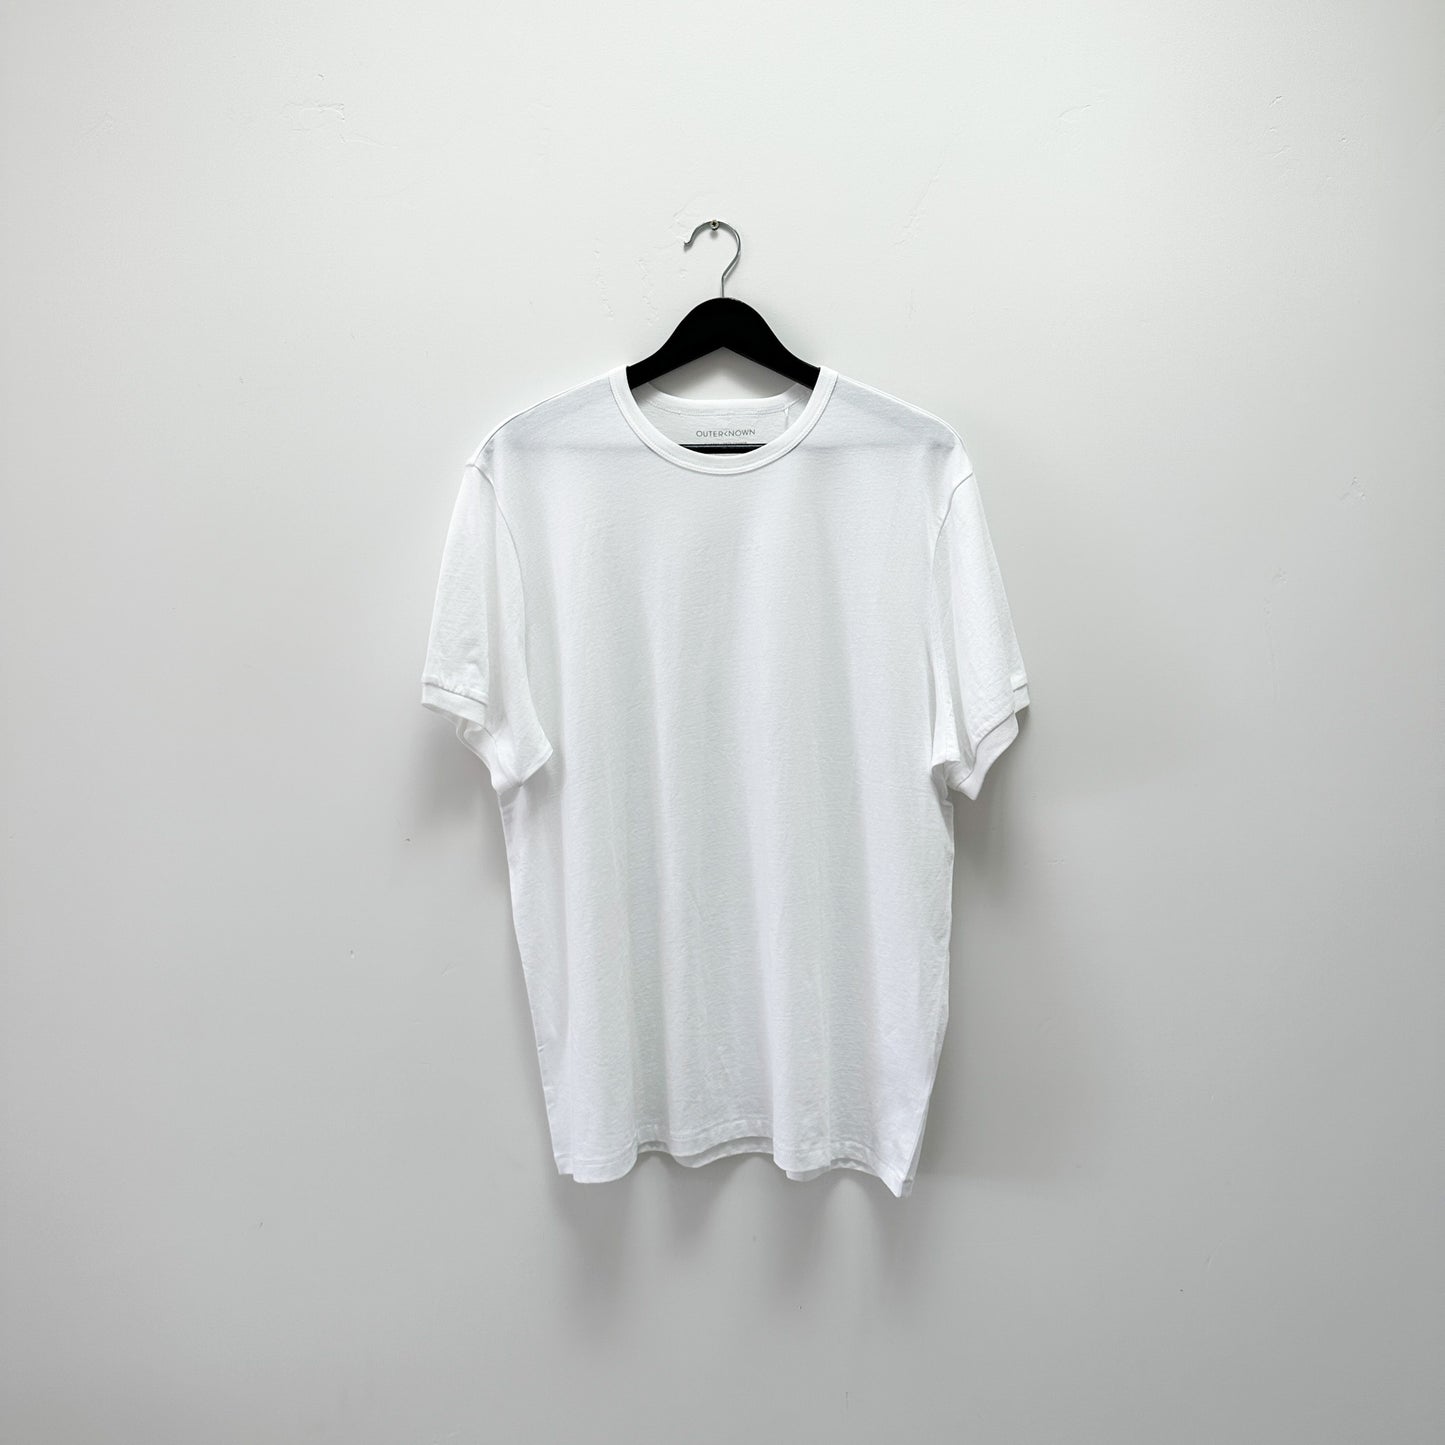 Outerknown - Sojourn Tee in White